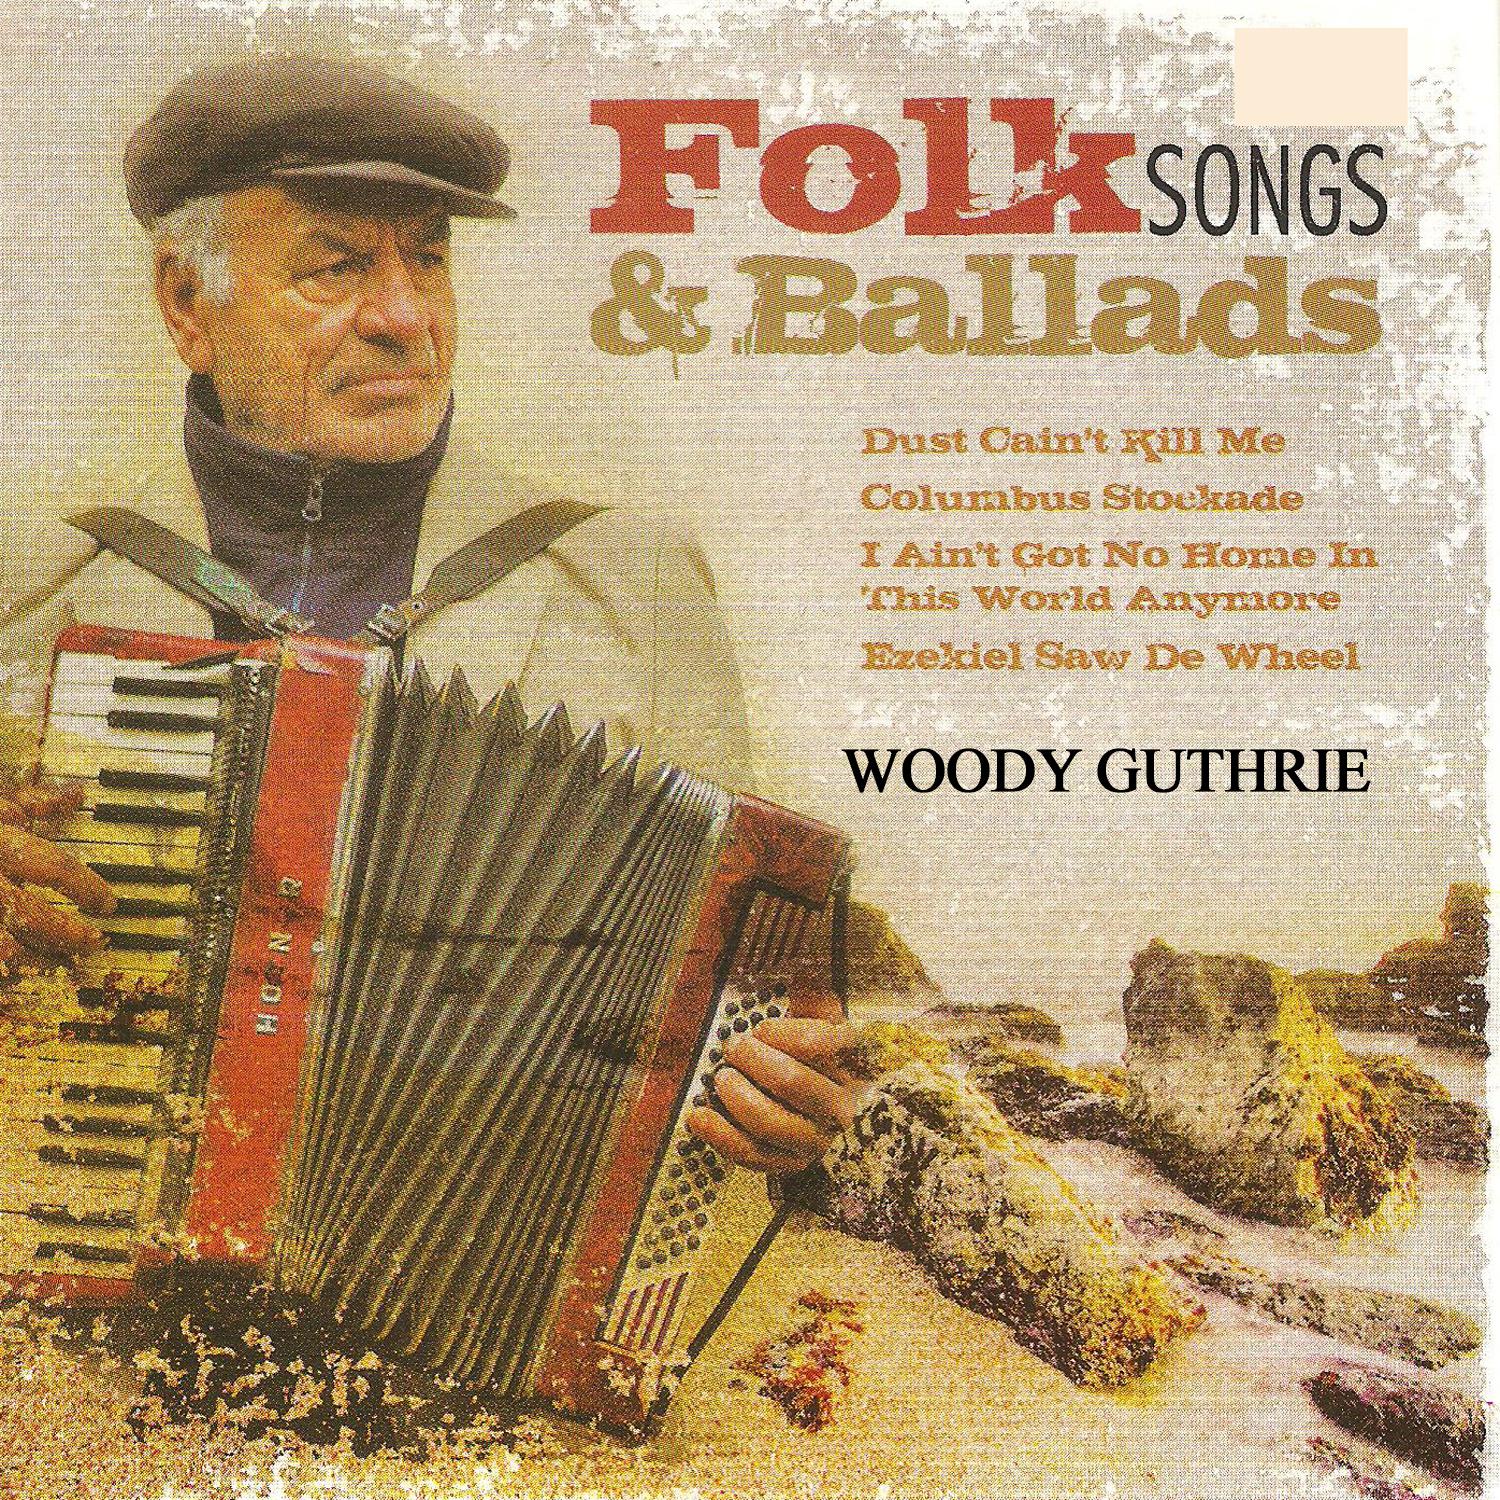 Folks Songs and Ballads, Vol. 1